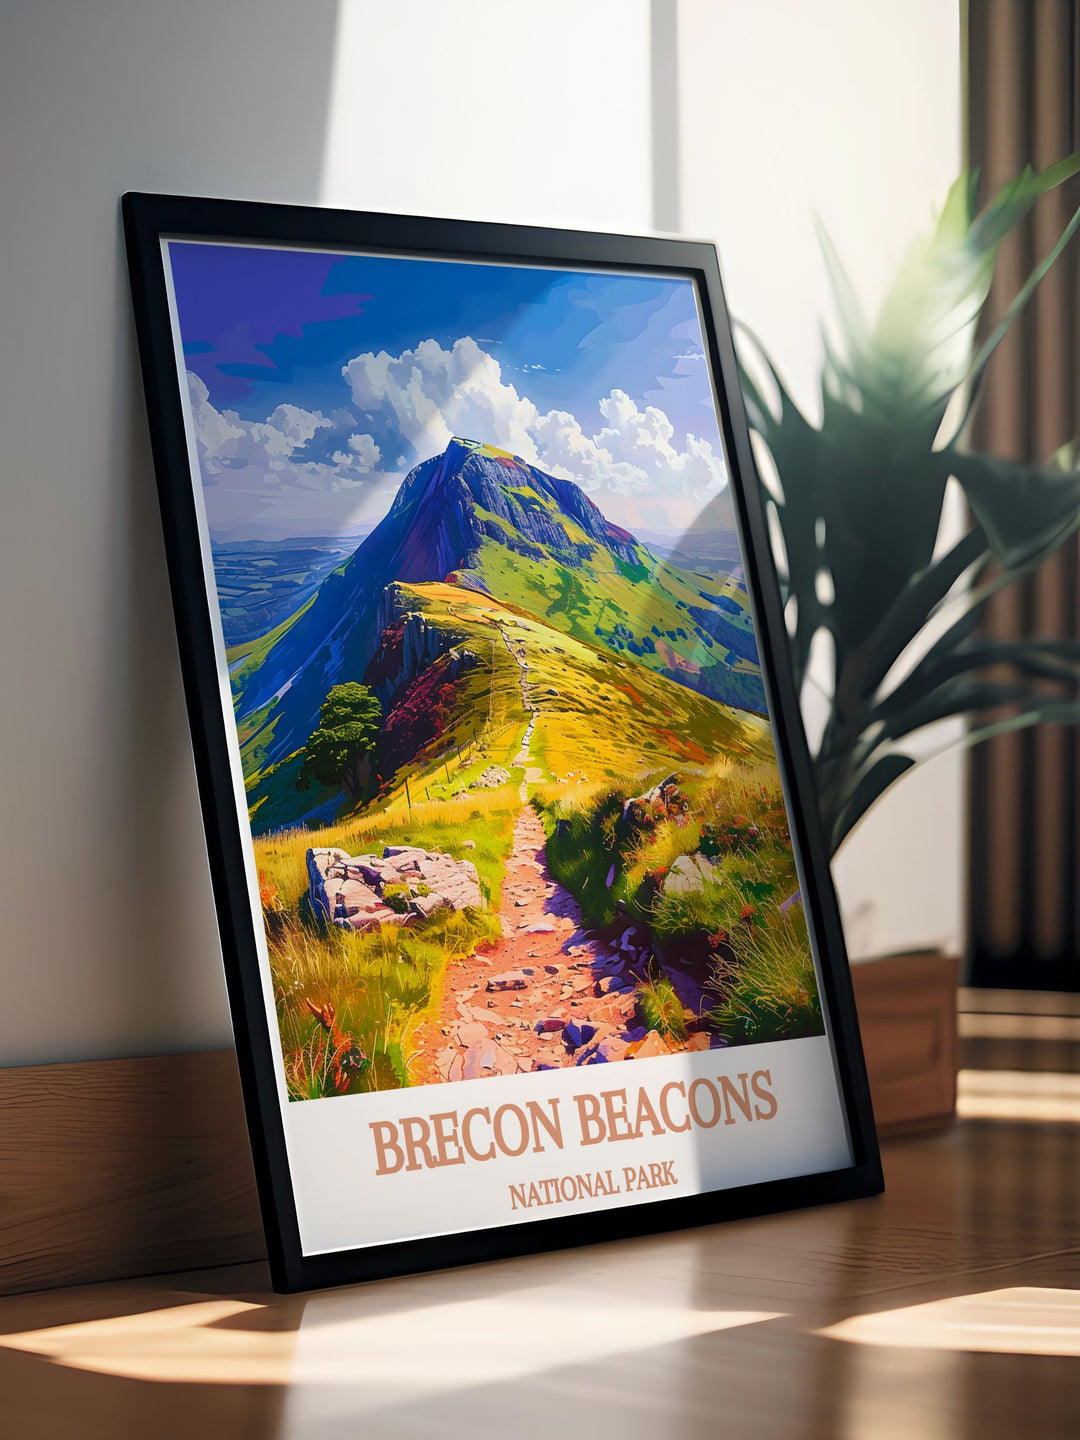 Beautiful framed art of Pen Y Fan, highlighting the majestic beauty of the Brecon Beacons National Park. This artwork brings the spirit of adventure and the stunning landscapes of South Wales into your home, making it an ideal centerpiece for any living space.